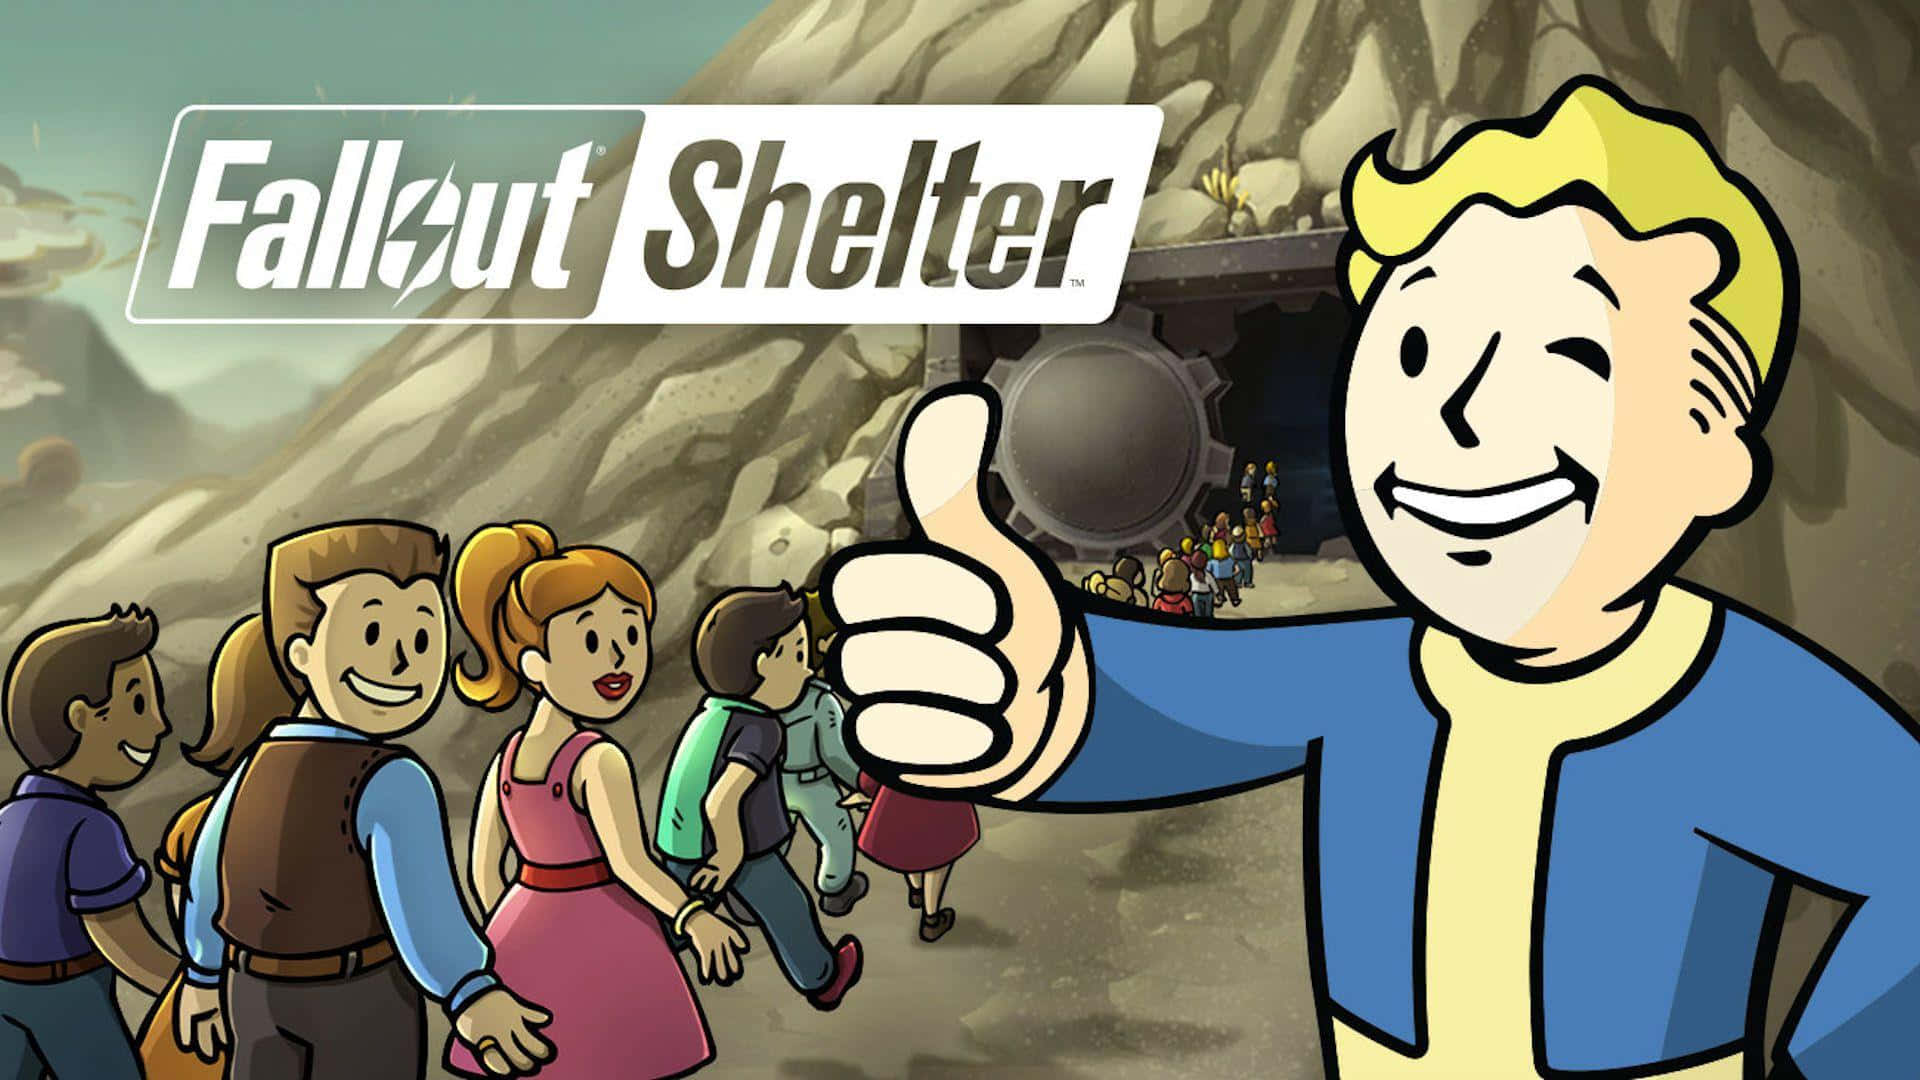 A thriving Fallout Shelter Vault with vault dwellers going about their tasks. Wallpaper